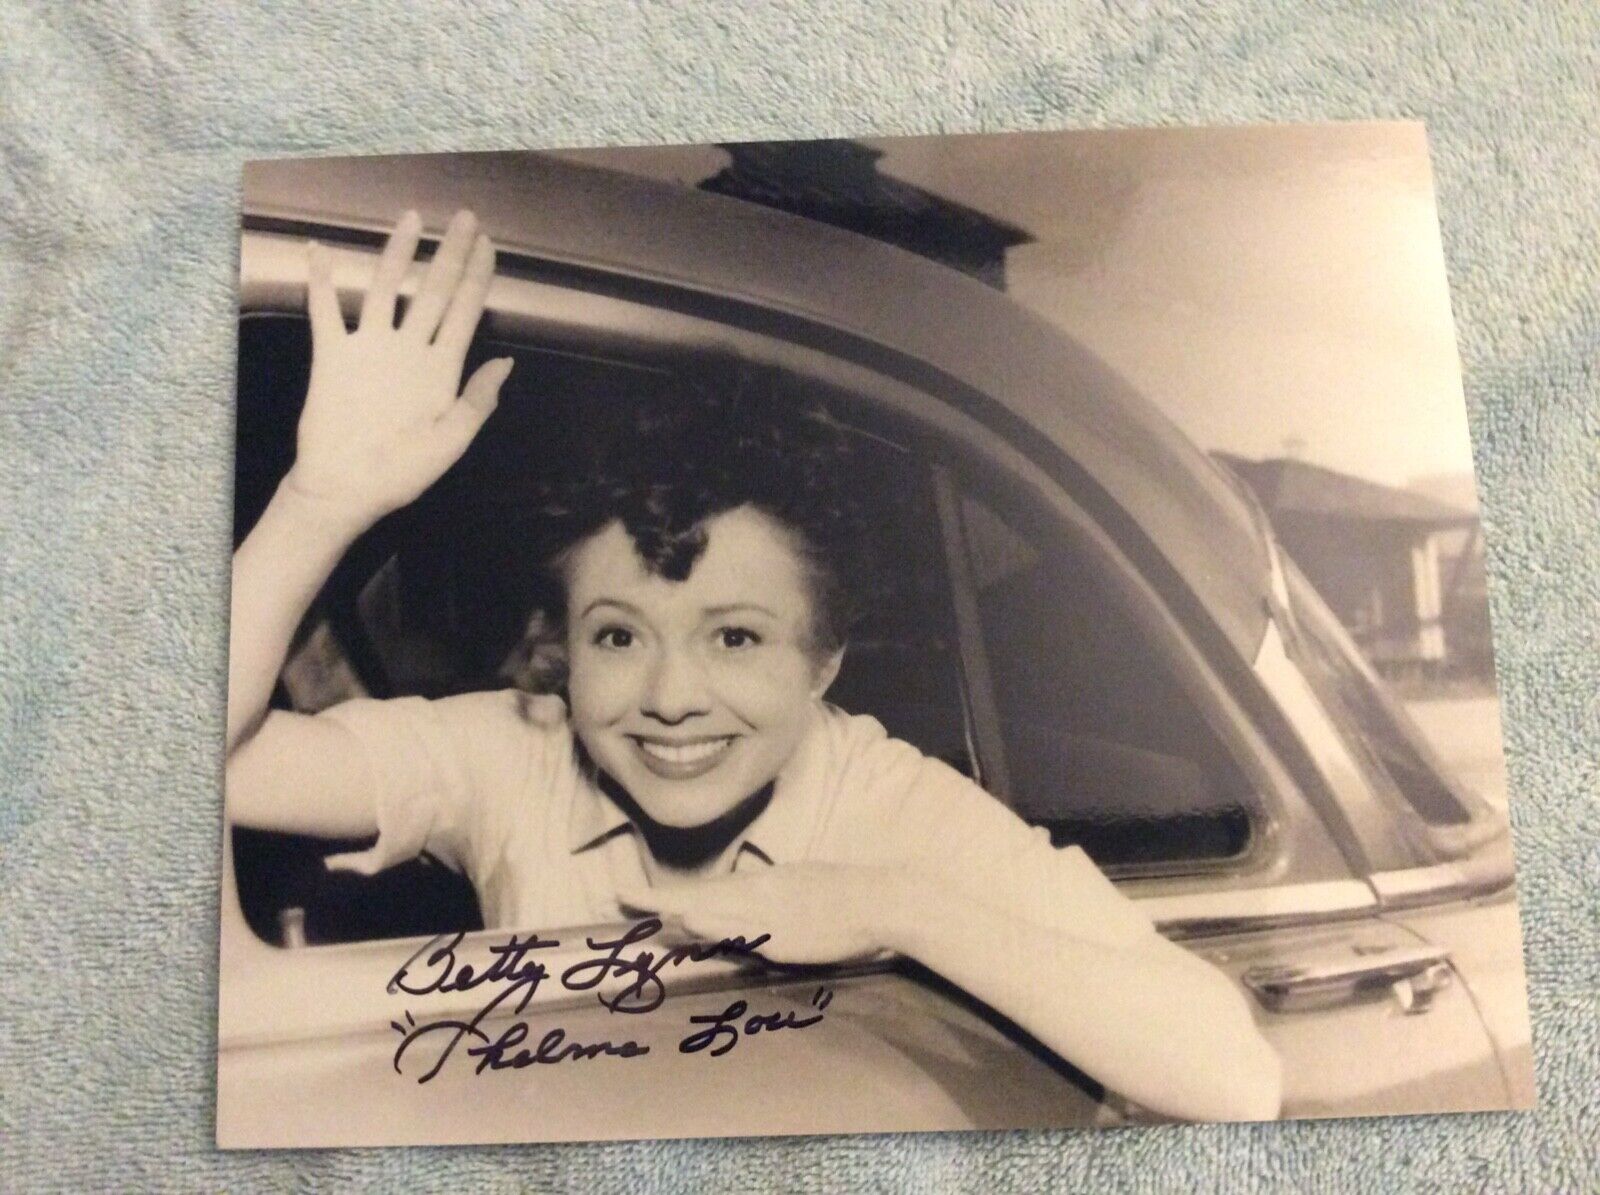 Betty Lynn as Thelma Lou The Andy Griffith Show Signed 8x10 Photo DECEASED